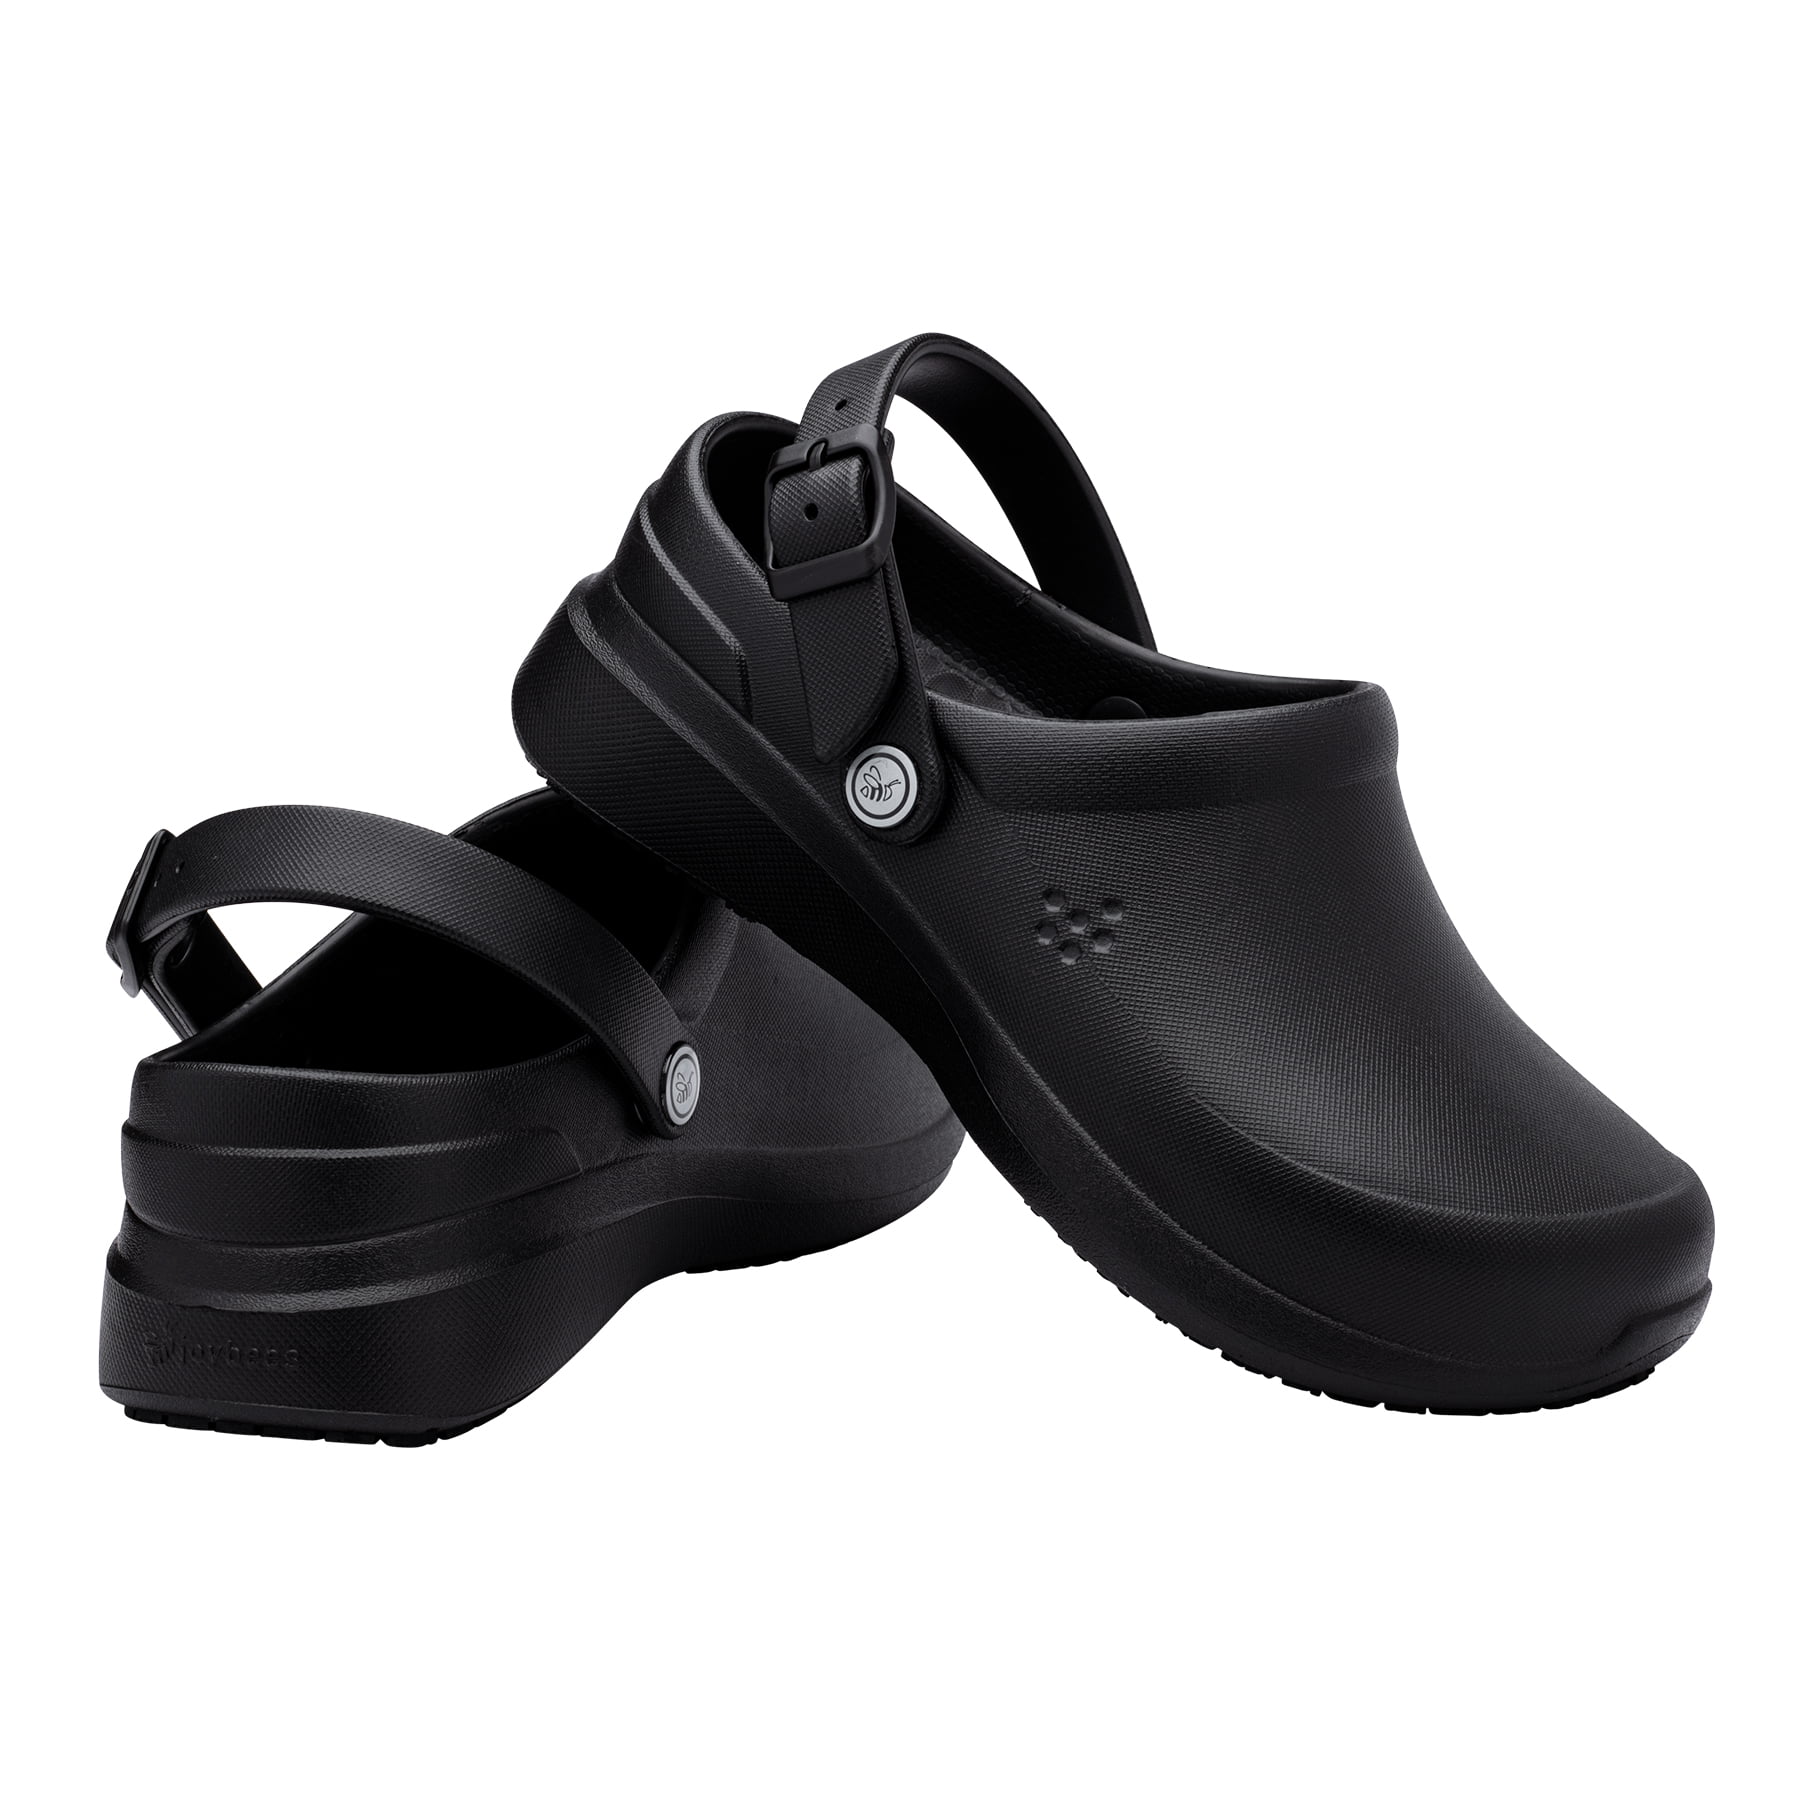 fascisme Frosset Forbindelse Joybees Work Clog - Slip Resistant, Supportive and Comfortable - Culinary  and Medical Professional Shoes for Women and Men - Walmart.com